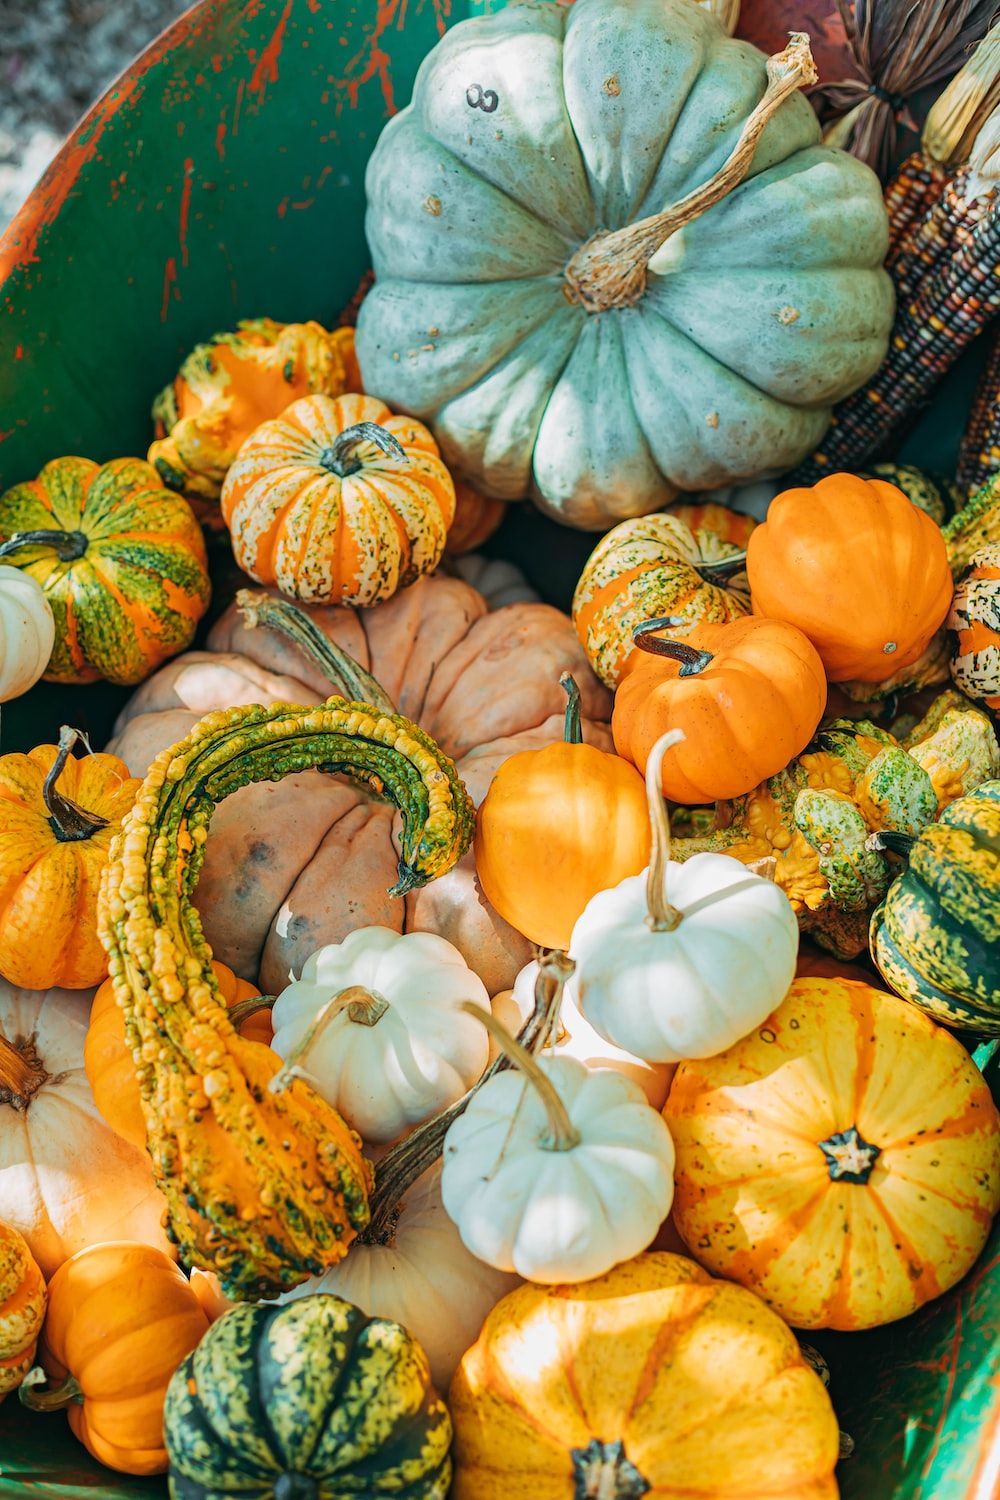 A green wheelbarrow is filled with a variety of small pumpkins and gourds. - Pumpkin